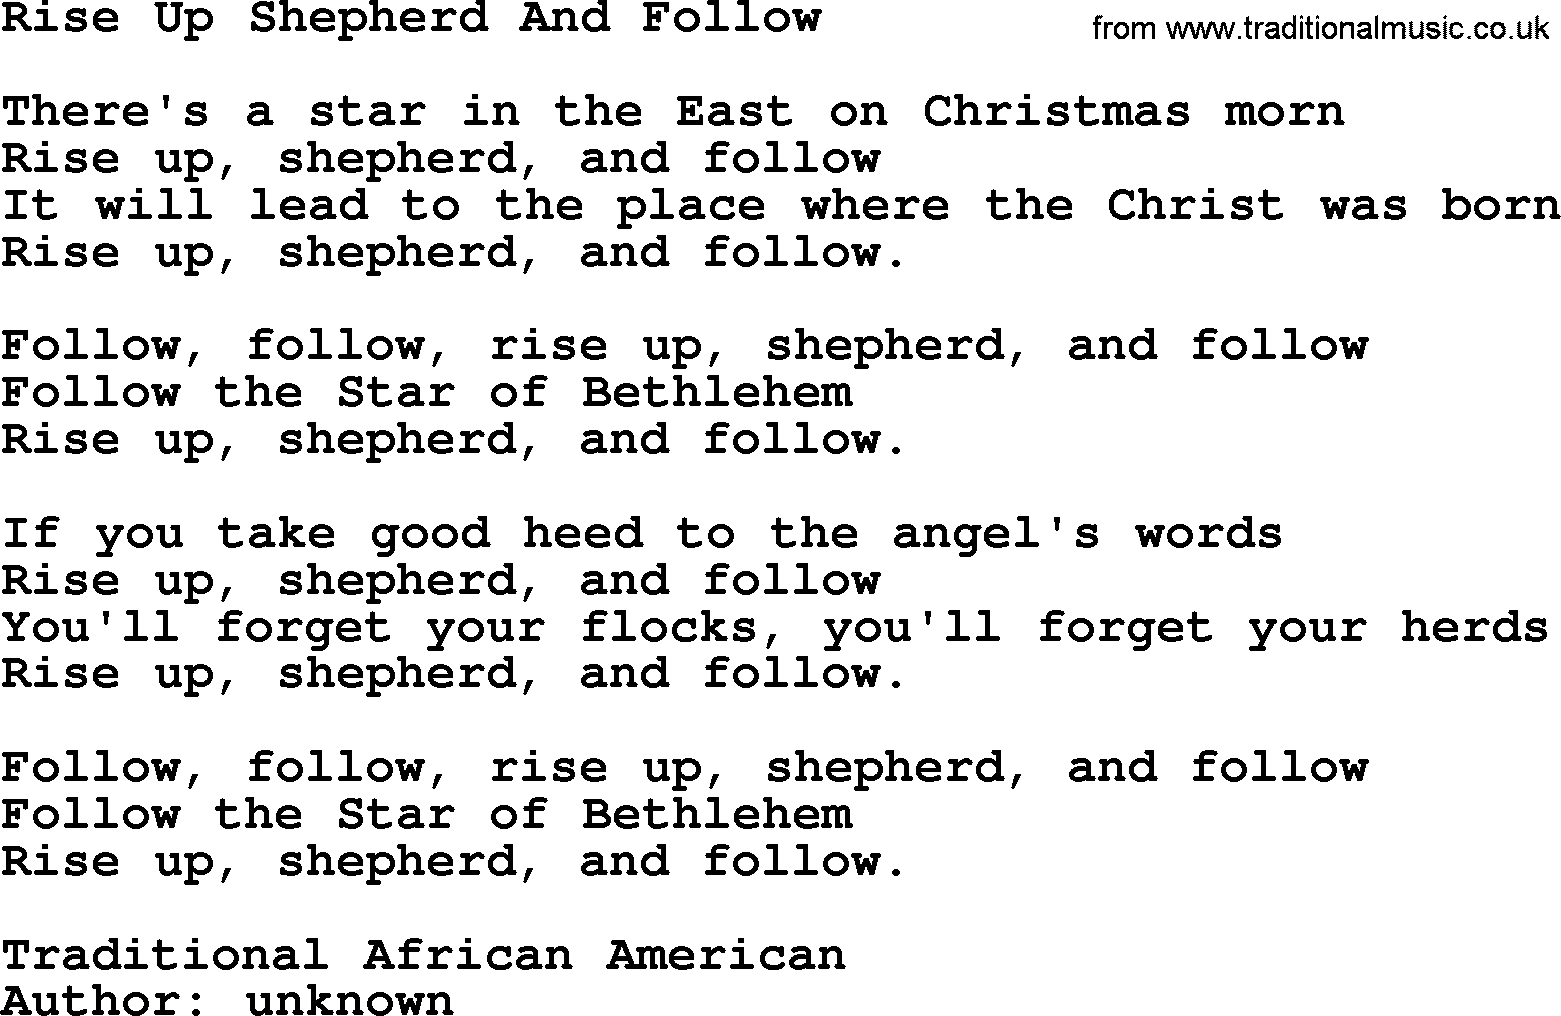 280 Christmas Hymns and songs with PowerPoints and PDF, title: Rise Up Shepherd And Follow, lyrics, PPT and PDF